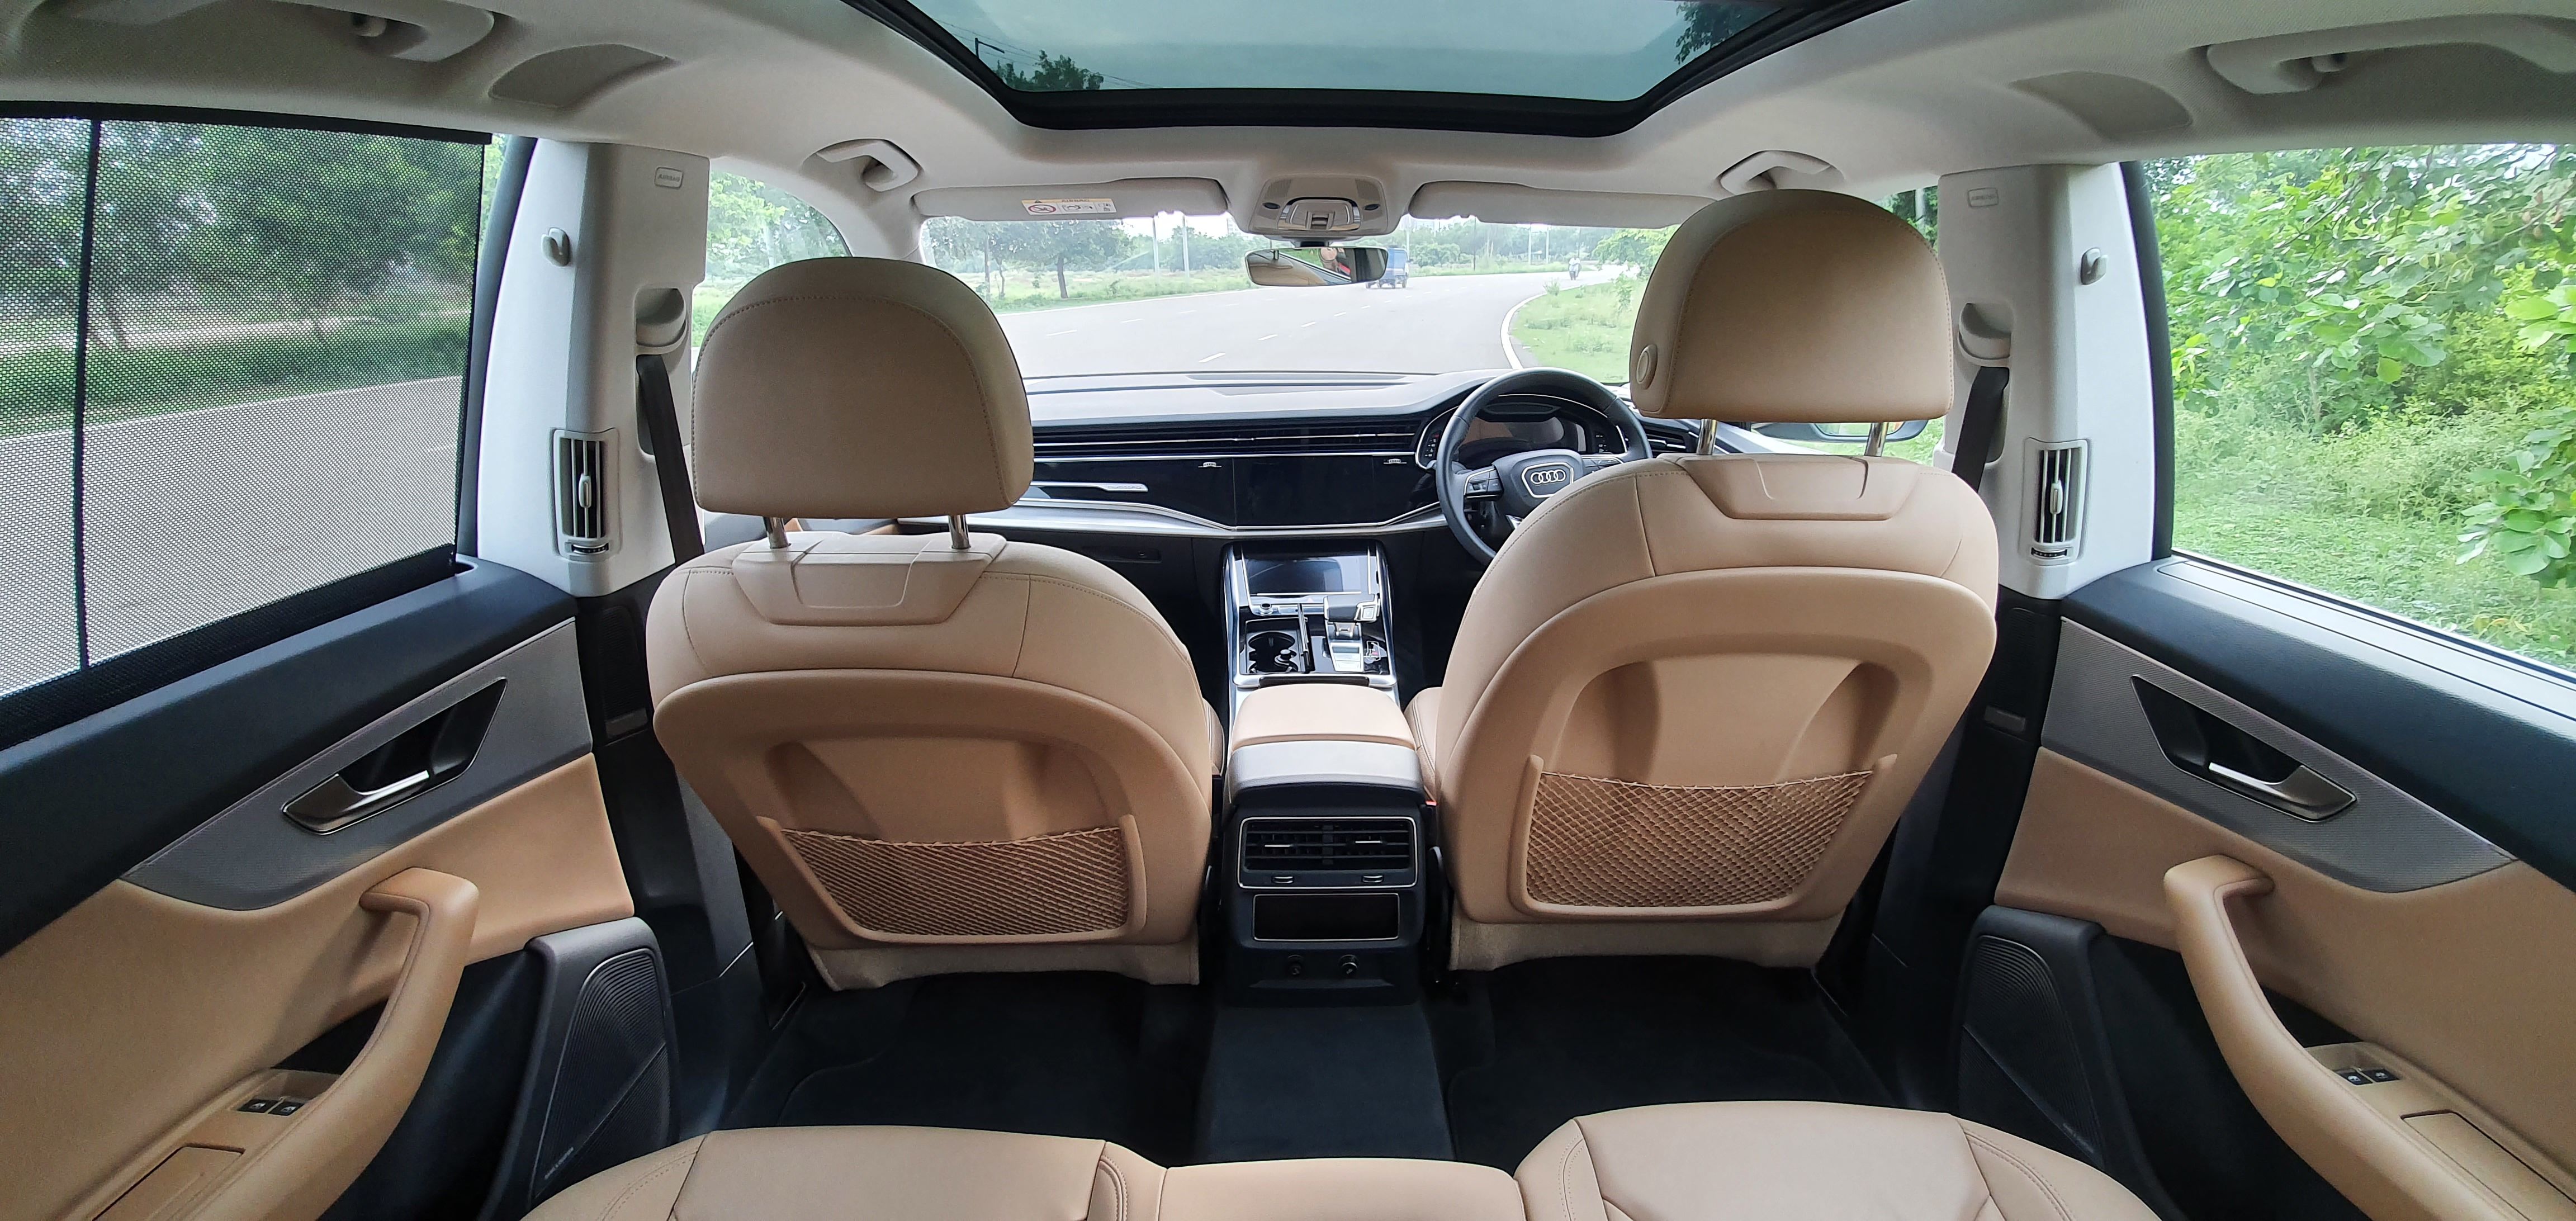 The large frameless windows and the panoramic sunroof make the large cabin of the Q8 appear even larger. (HTAuto.com/Sabyasachi Dasgupta)